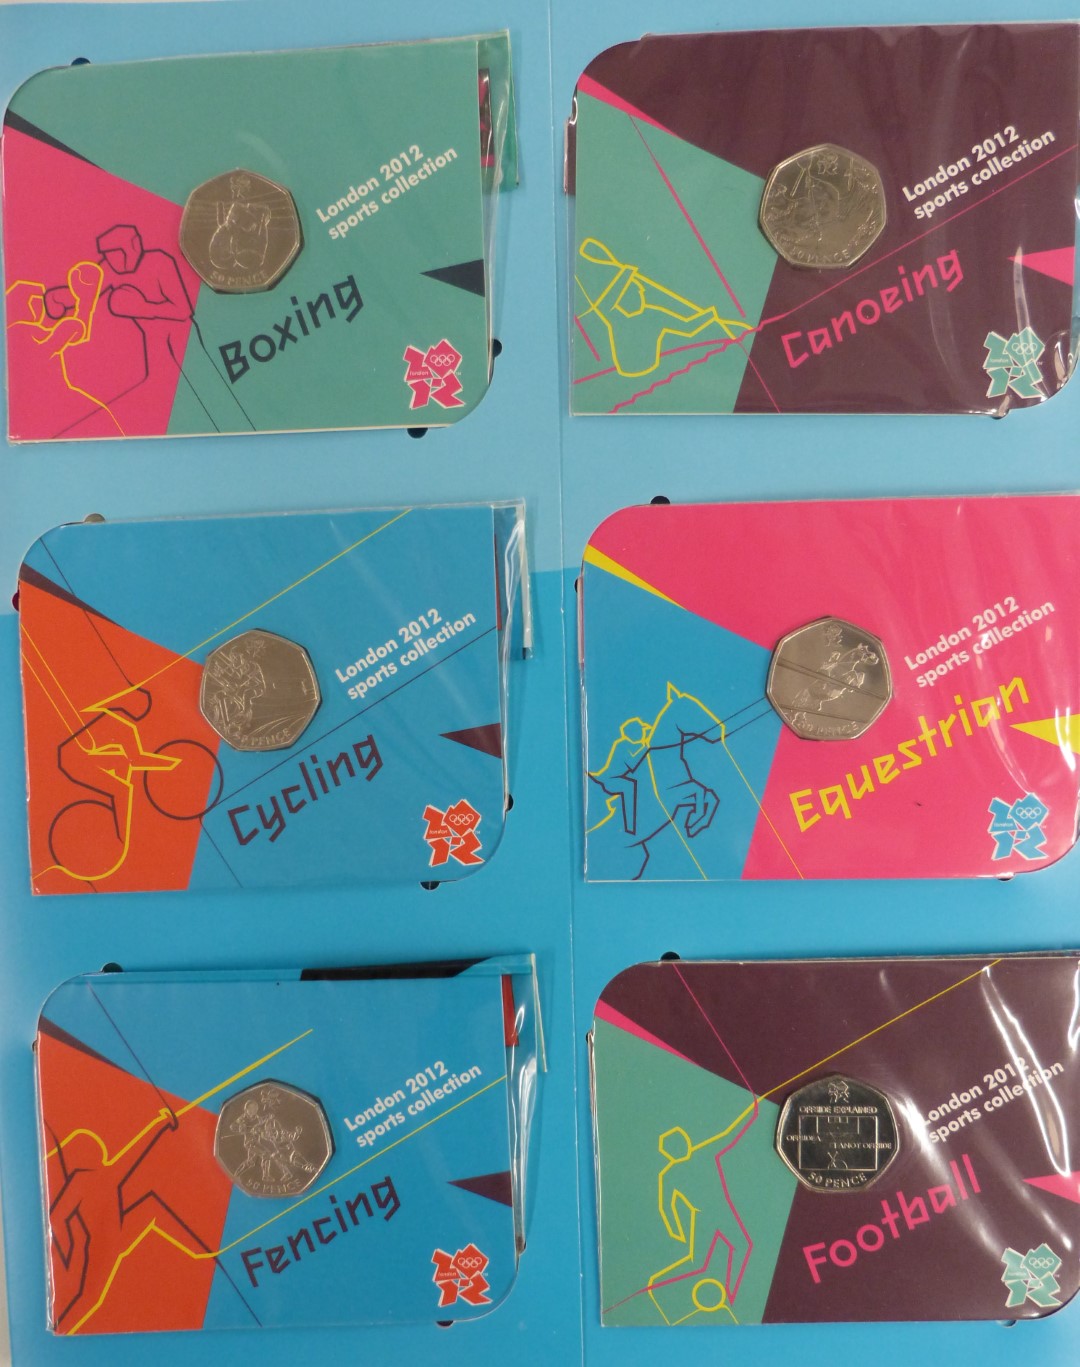 2012 London Olympic Games 50p collector's album with set of 29 coins and completion medallion - Image 2 of 5